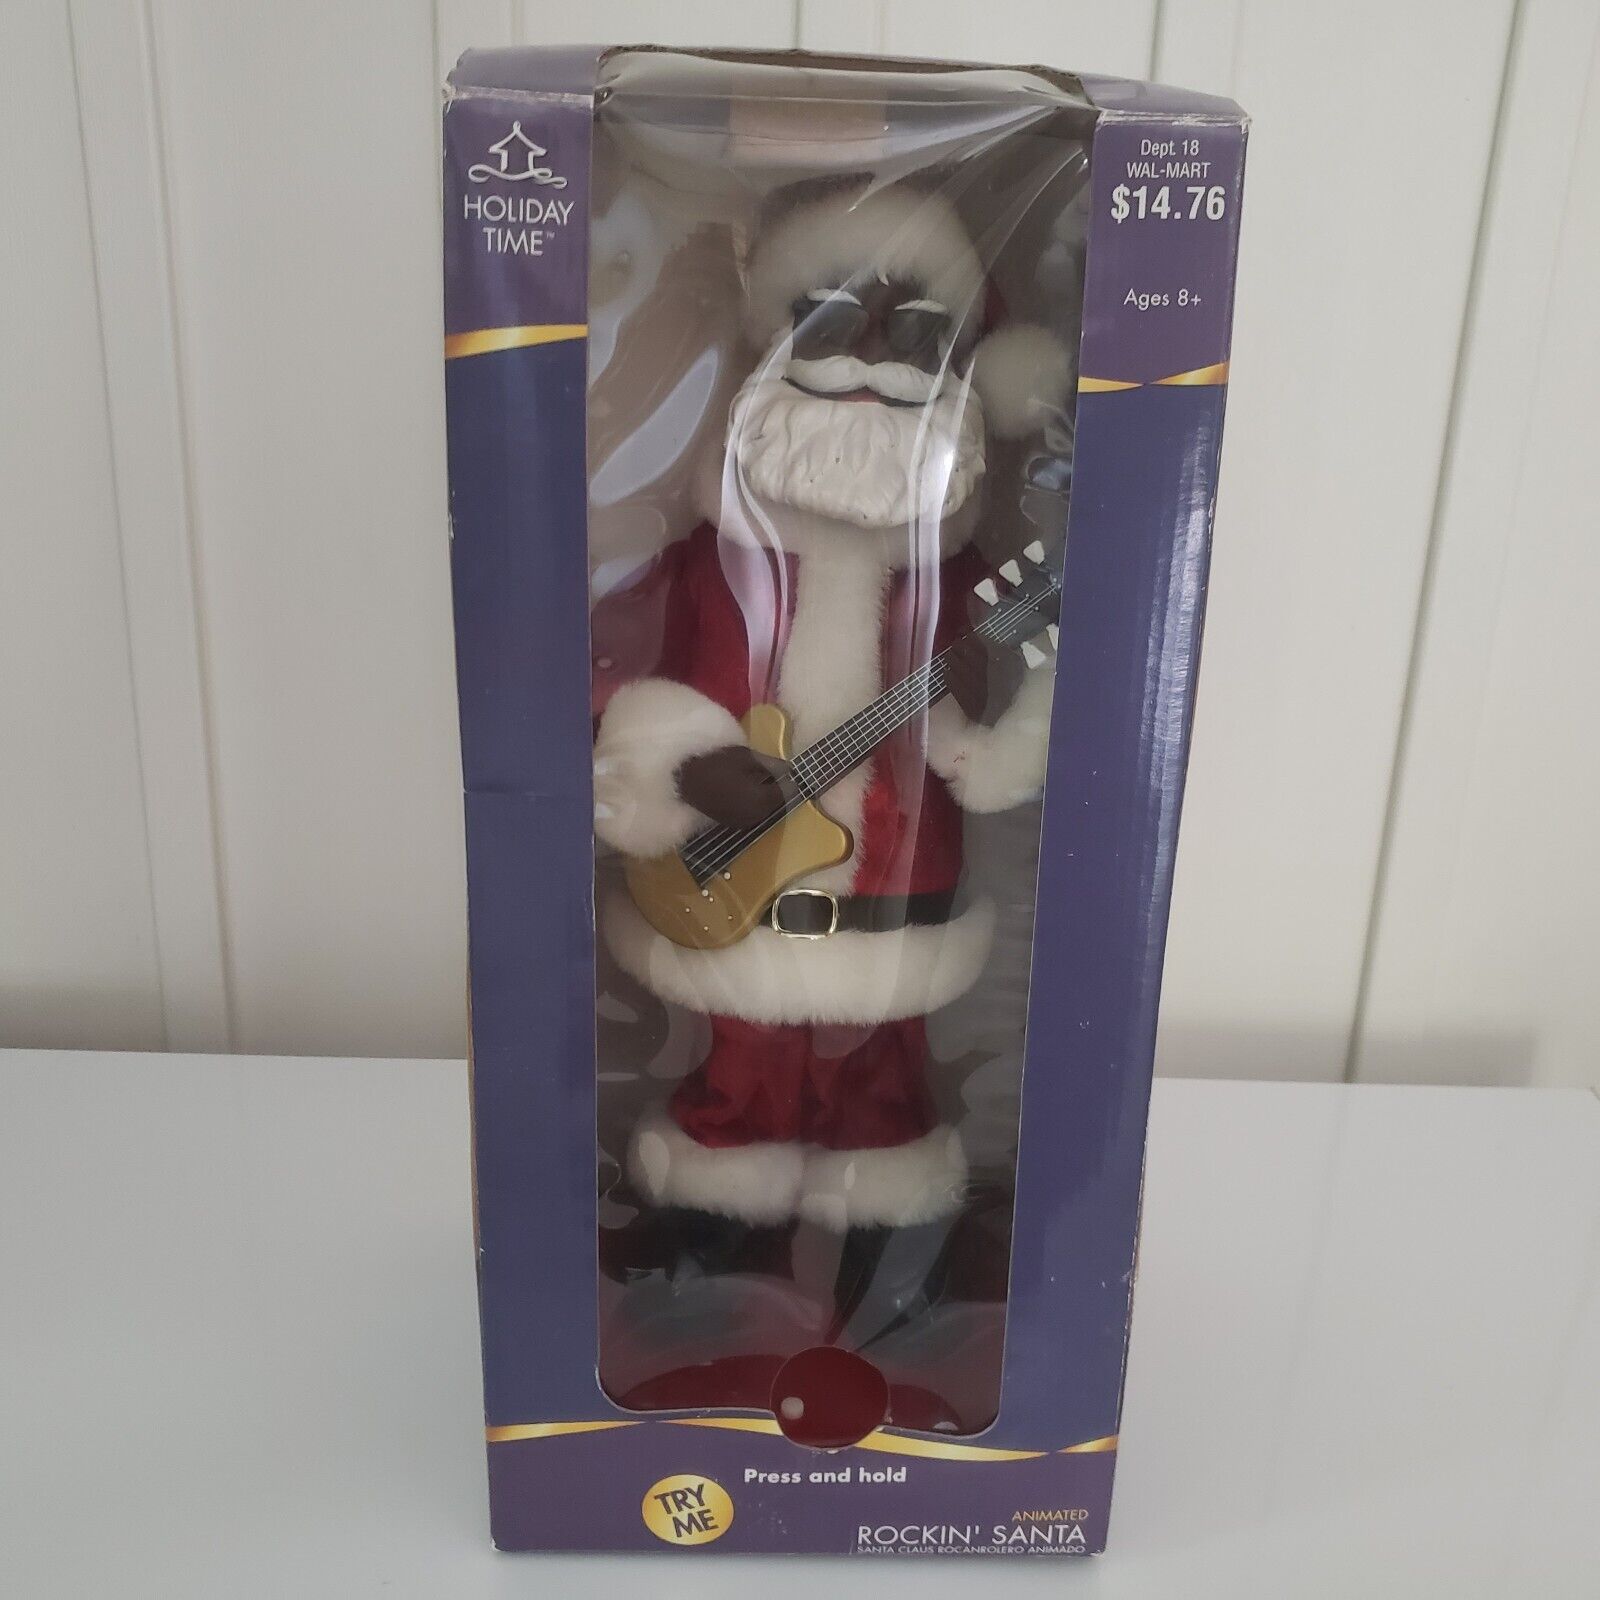 Rockin Santa Claus Guitar Player Old Time Rock n Roll Holiday Time Christmas 